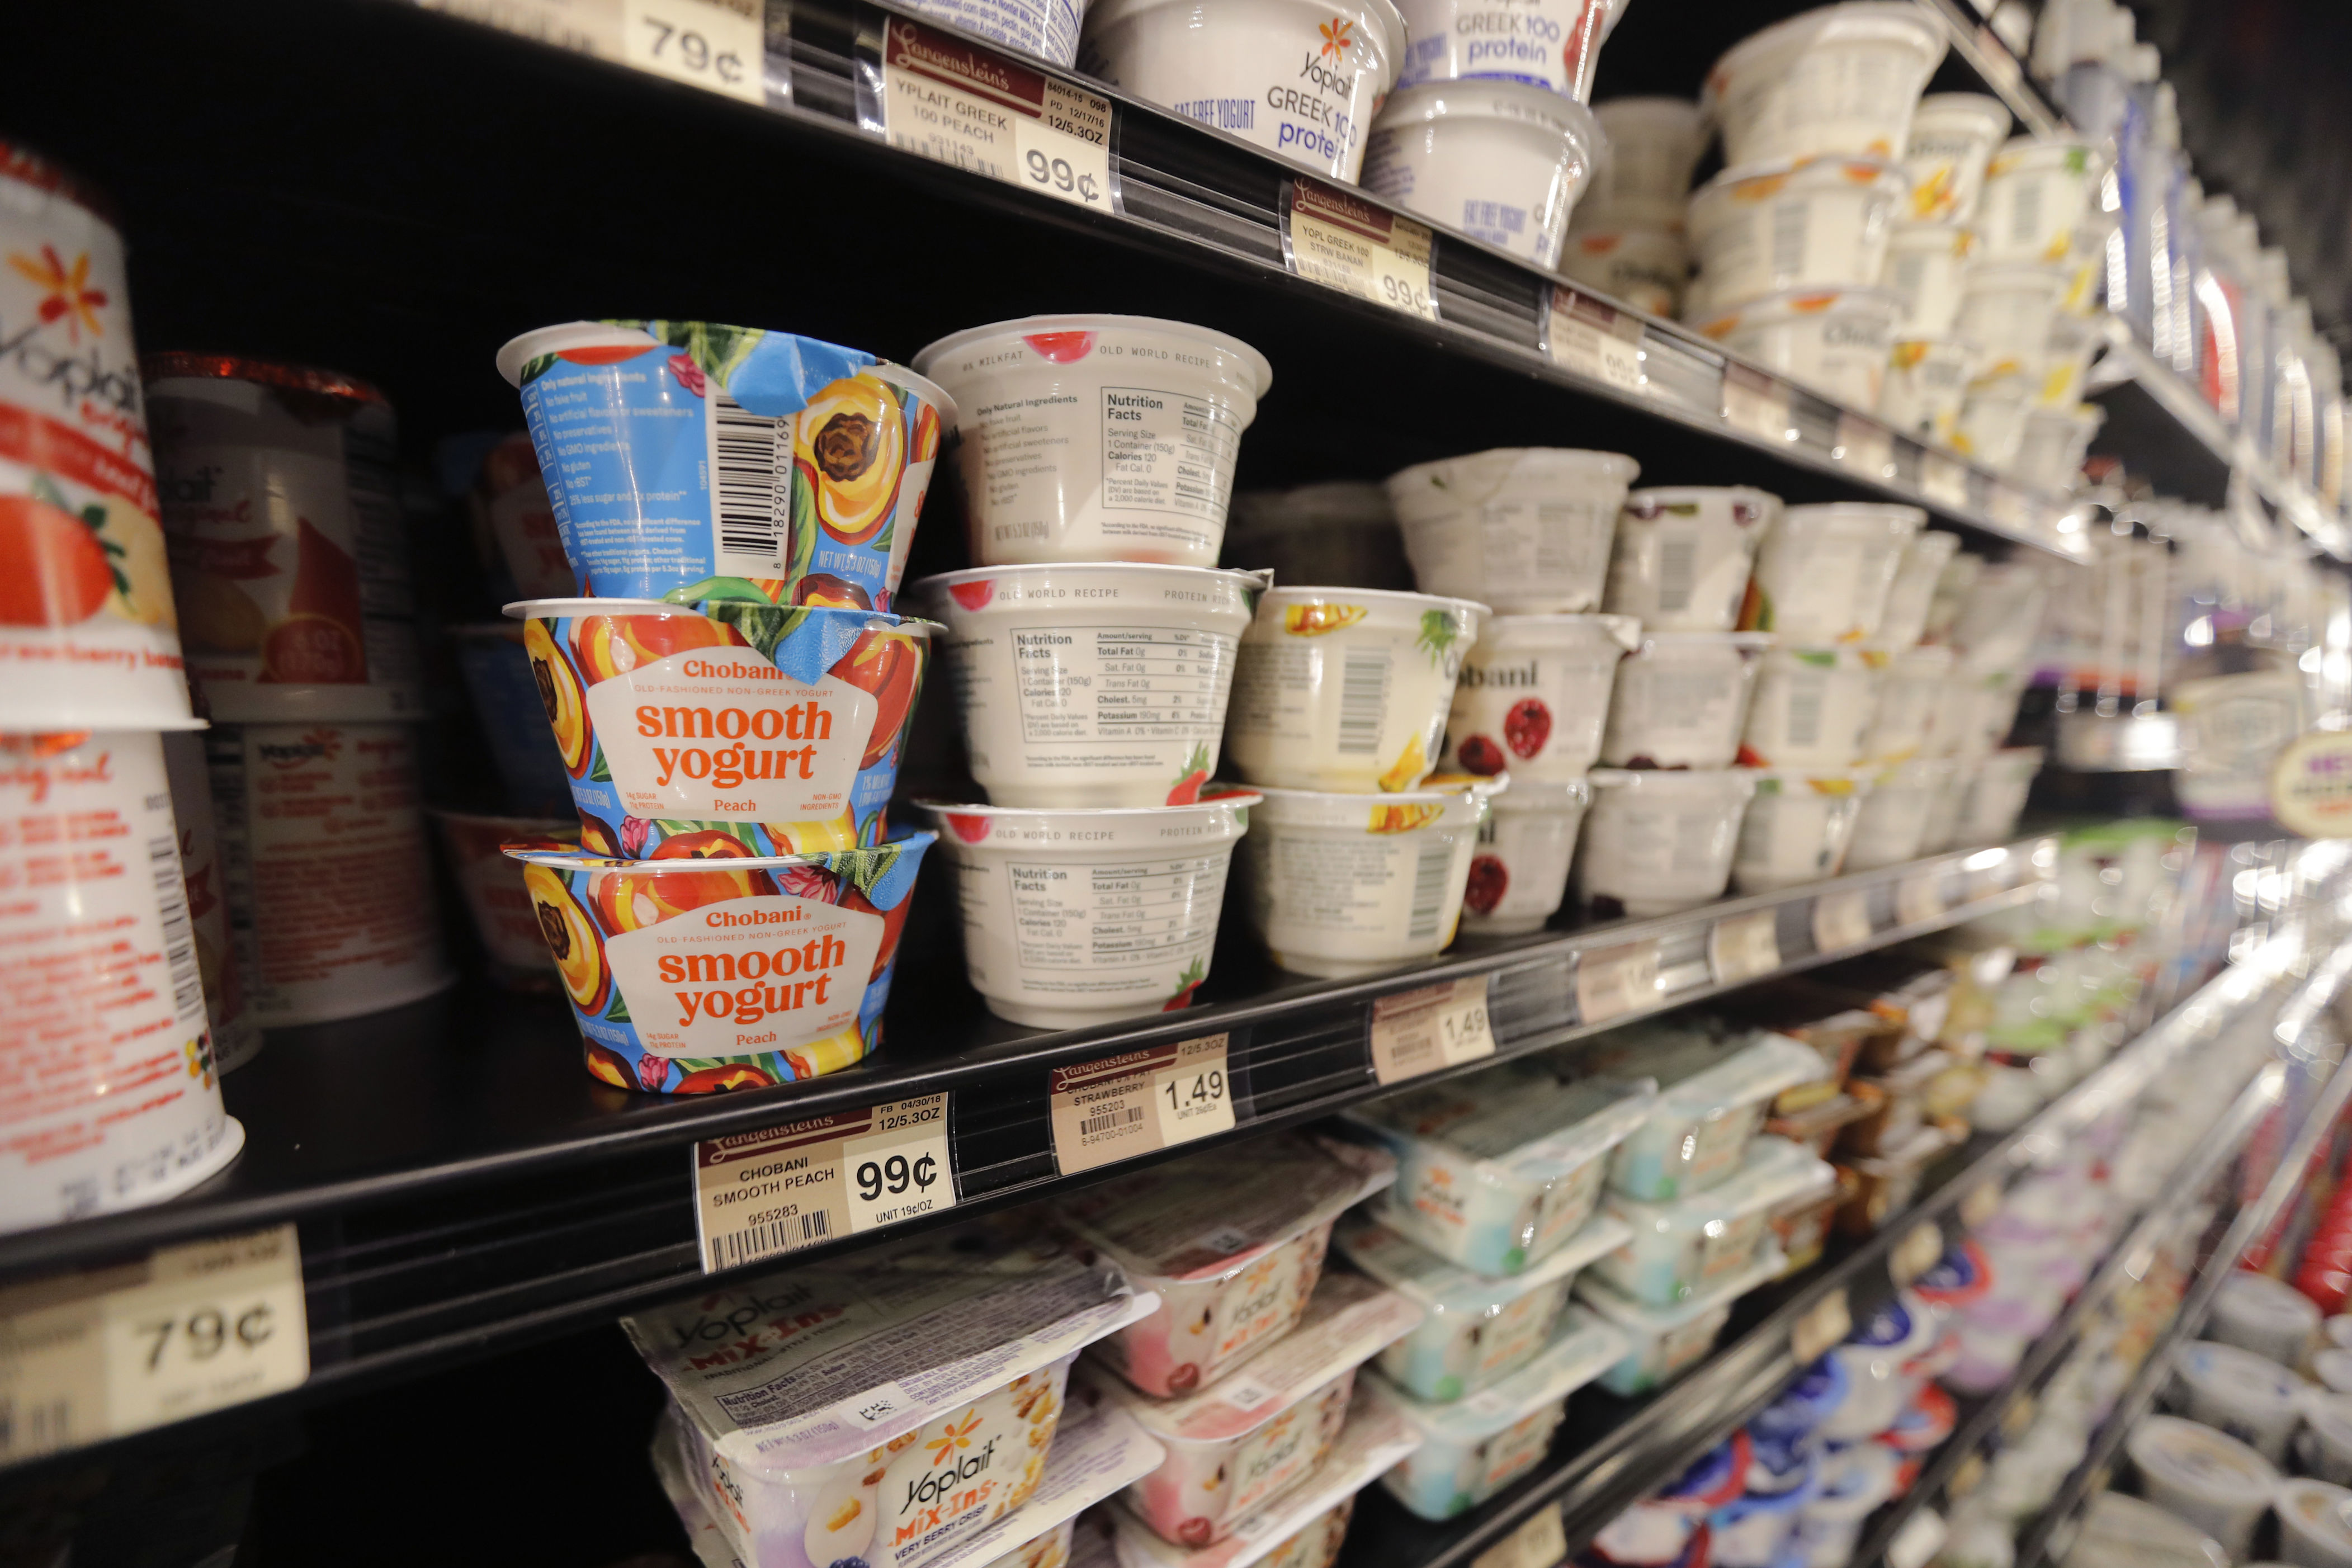 yogurt can lower diabetes risk, fda allows makers to claim, with caveats